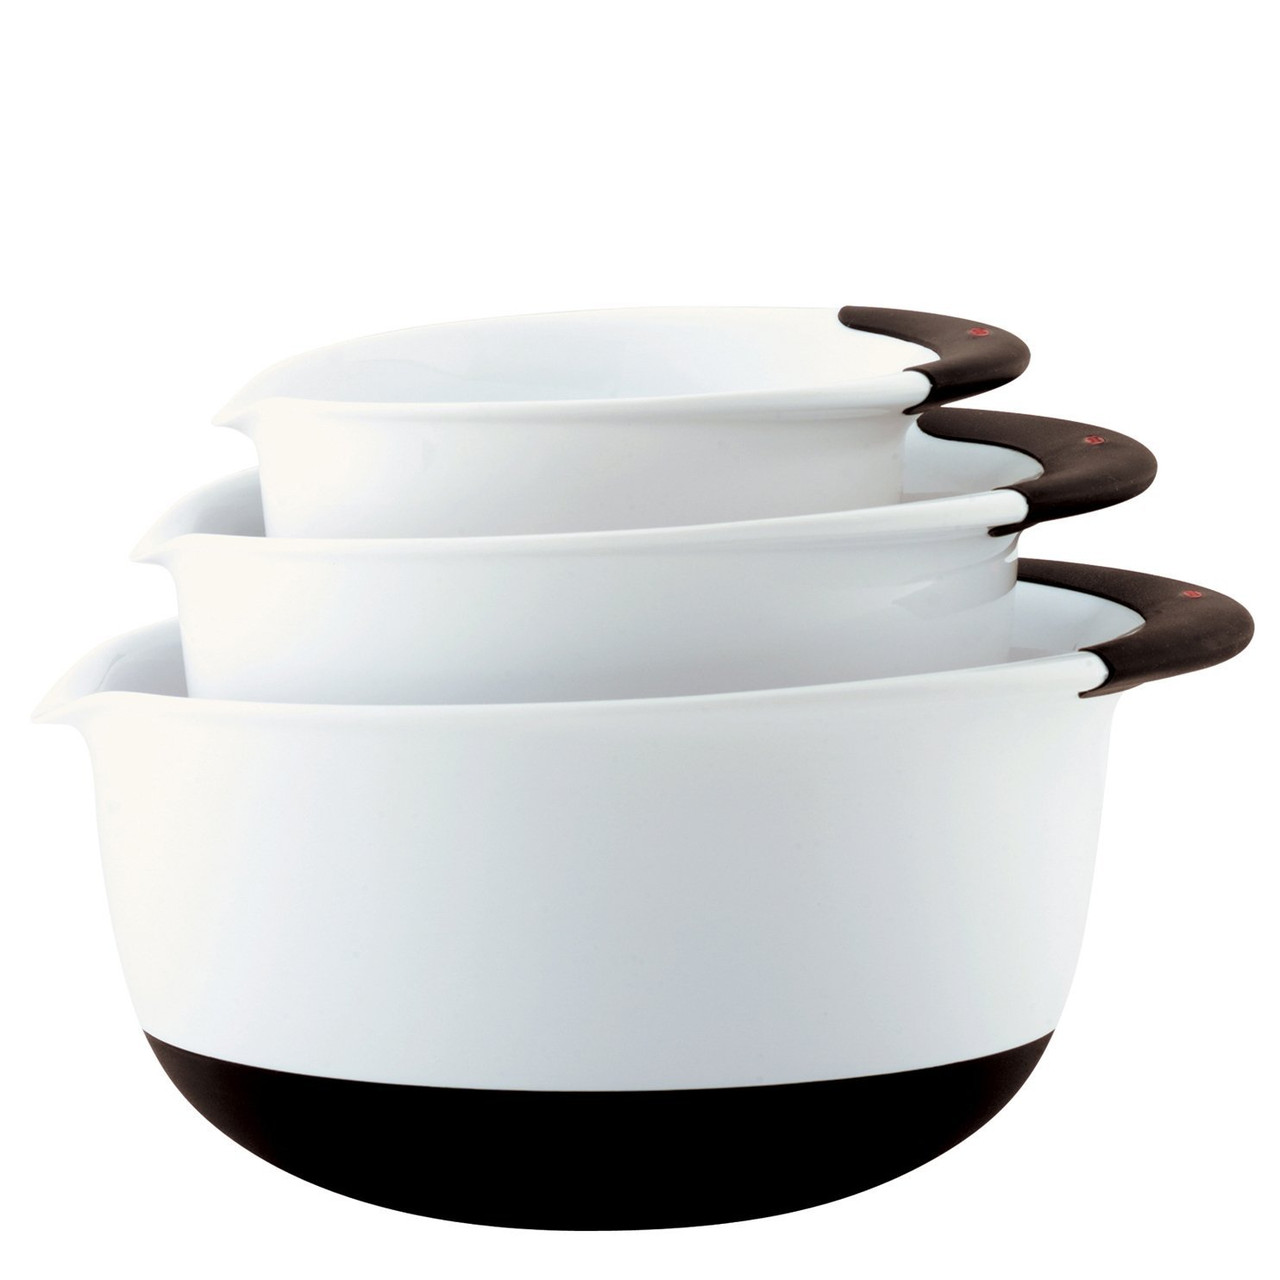 https://cdn11.bigcommerce.com/s-hccytny0od/images/stencil/1280x1280/products/4680/18884/oxo-good-grips-3-piece-mixing-bowl-set_1__41123.1651181200.jpg?c=2?imbypass=on